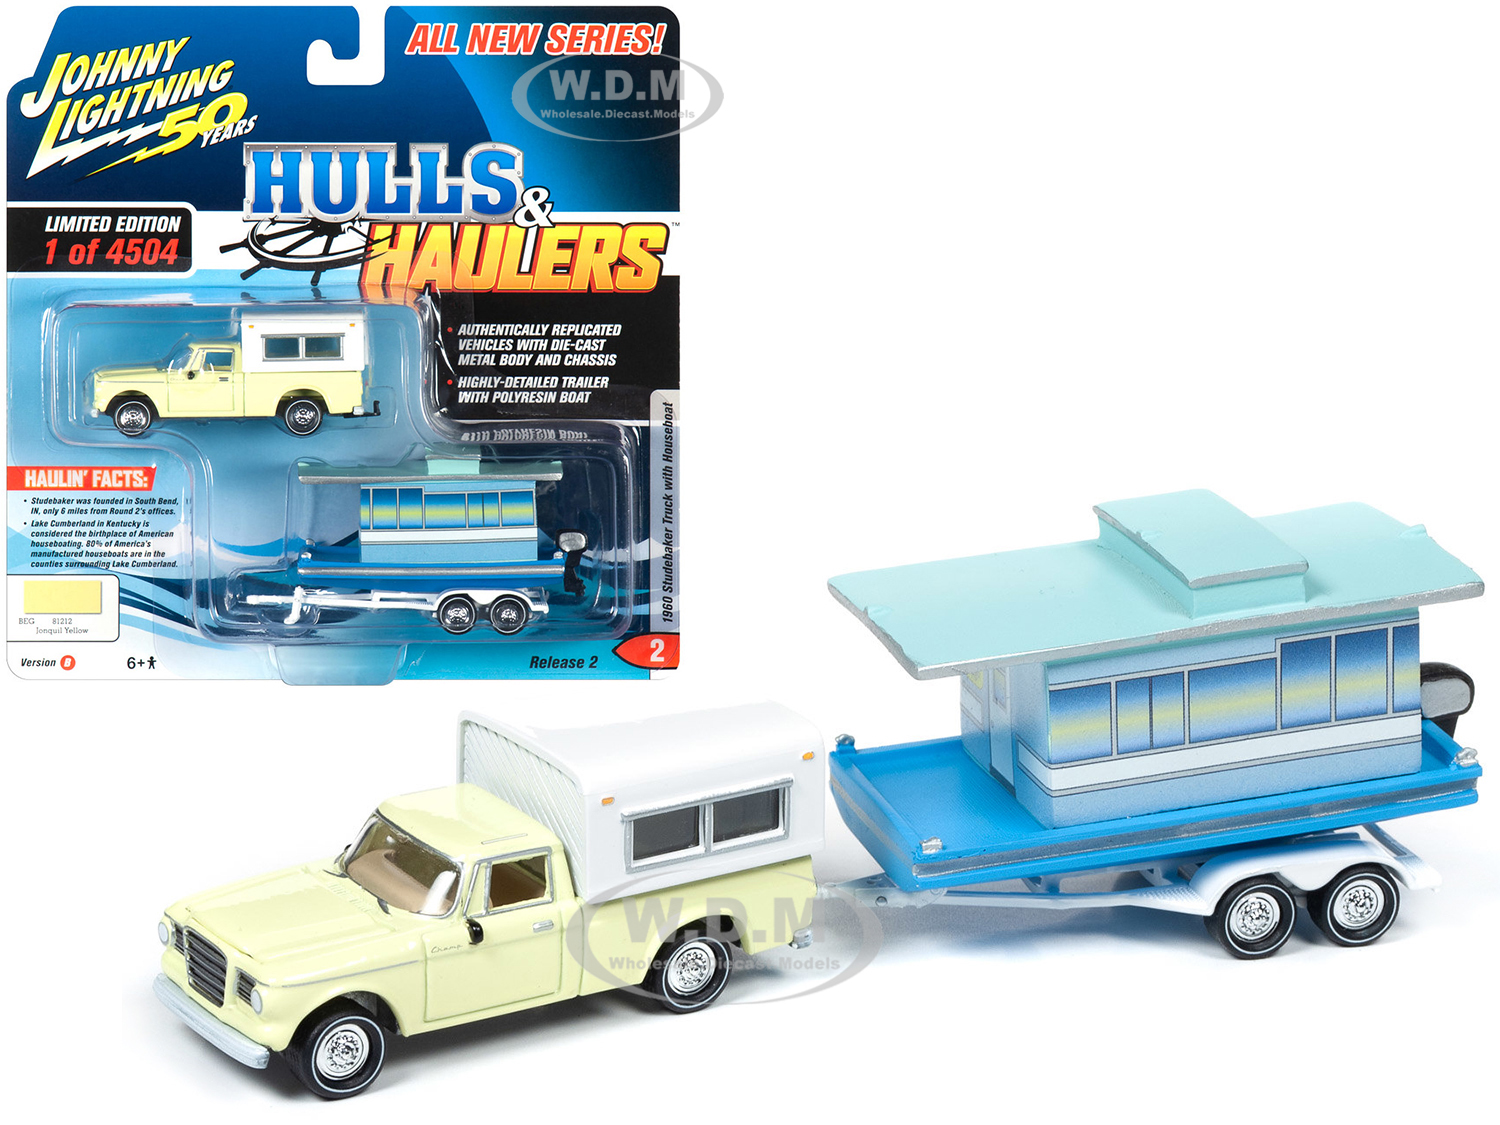 1960 Studebaker Pickup Truck With Camper Shell Jonquil Yellow With Houseboat Limited Edition To 4504 Pieces Worldwide "hulls & Haulers" Series 2